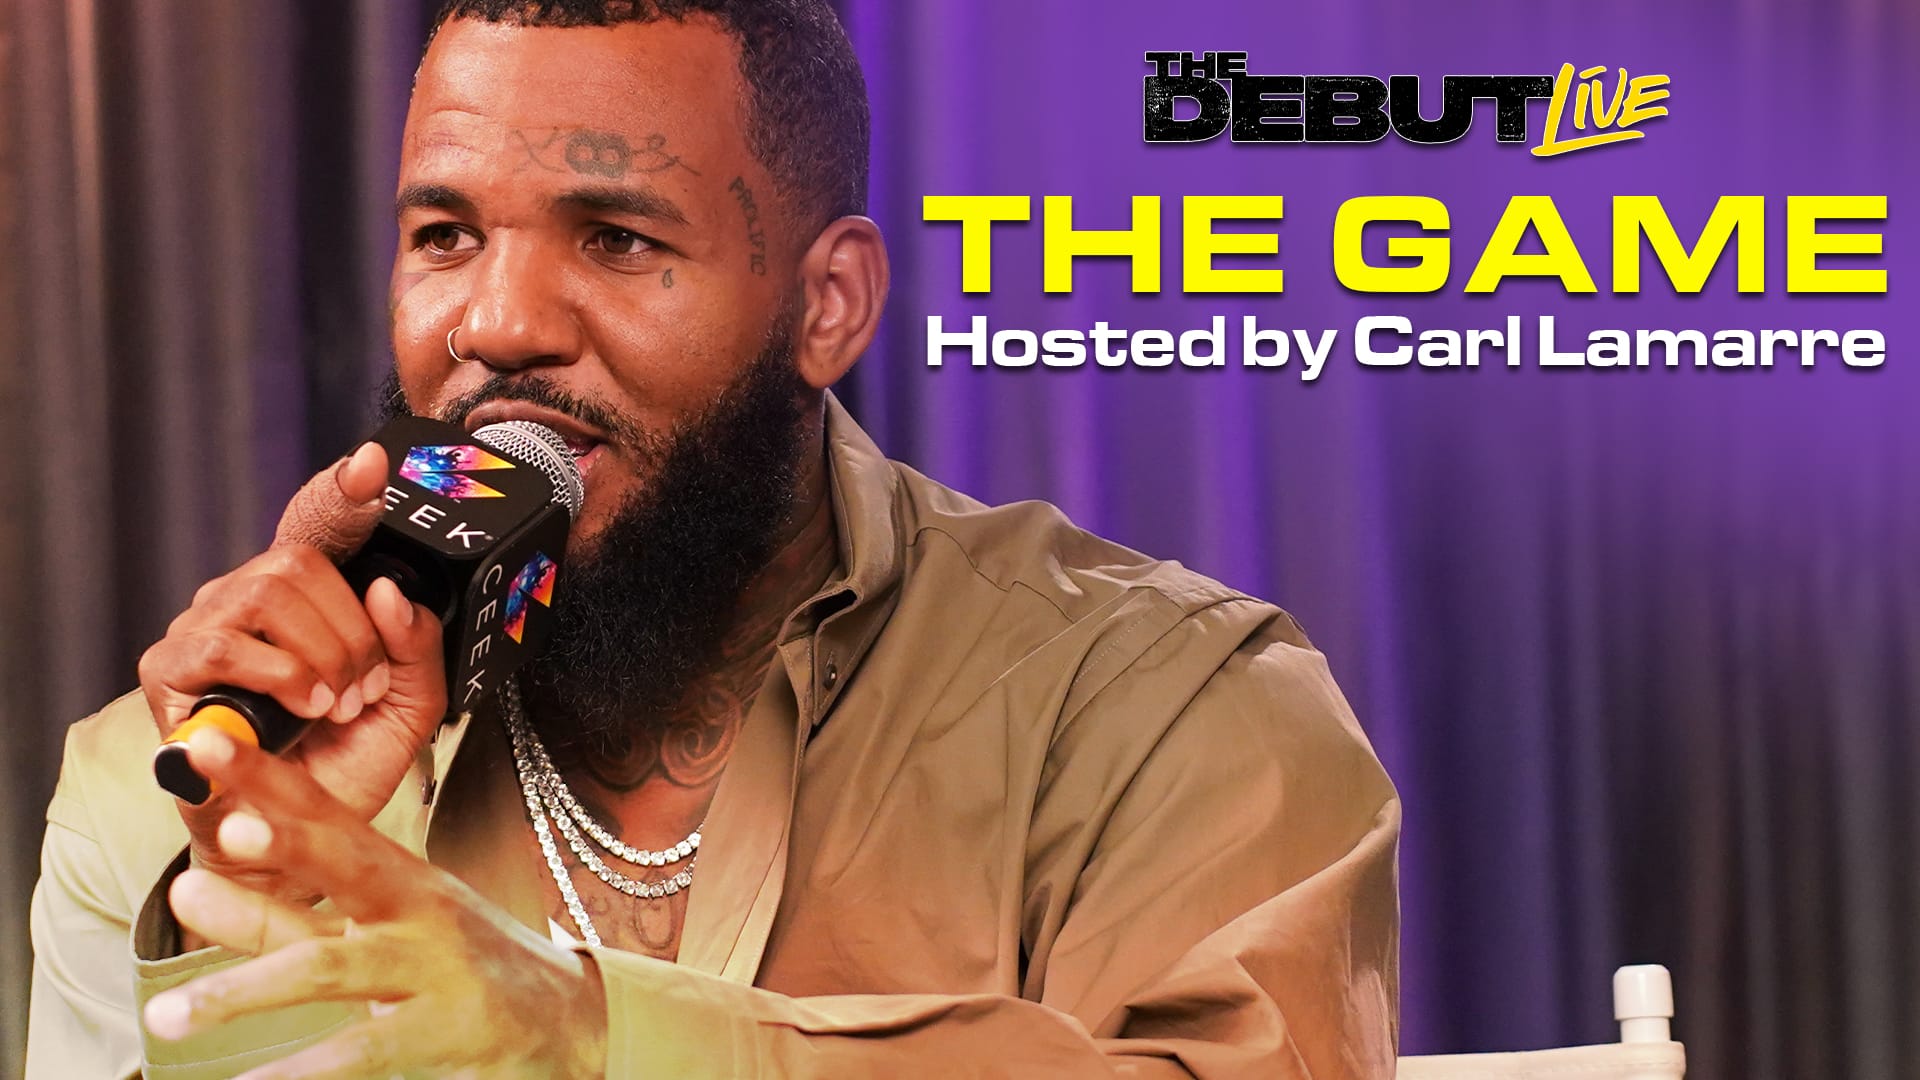 The Game The Debut Live